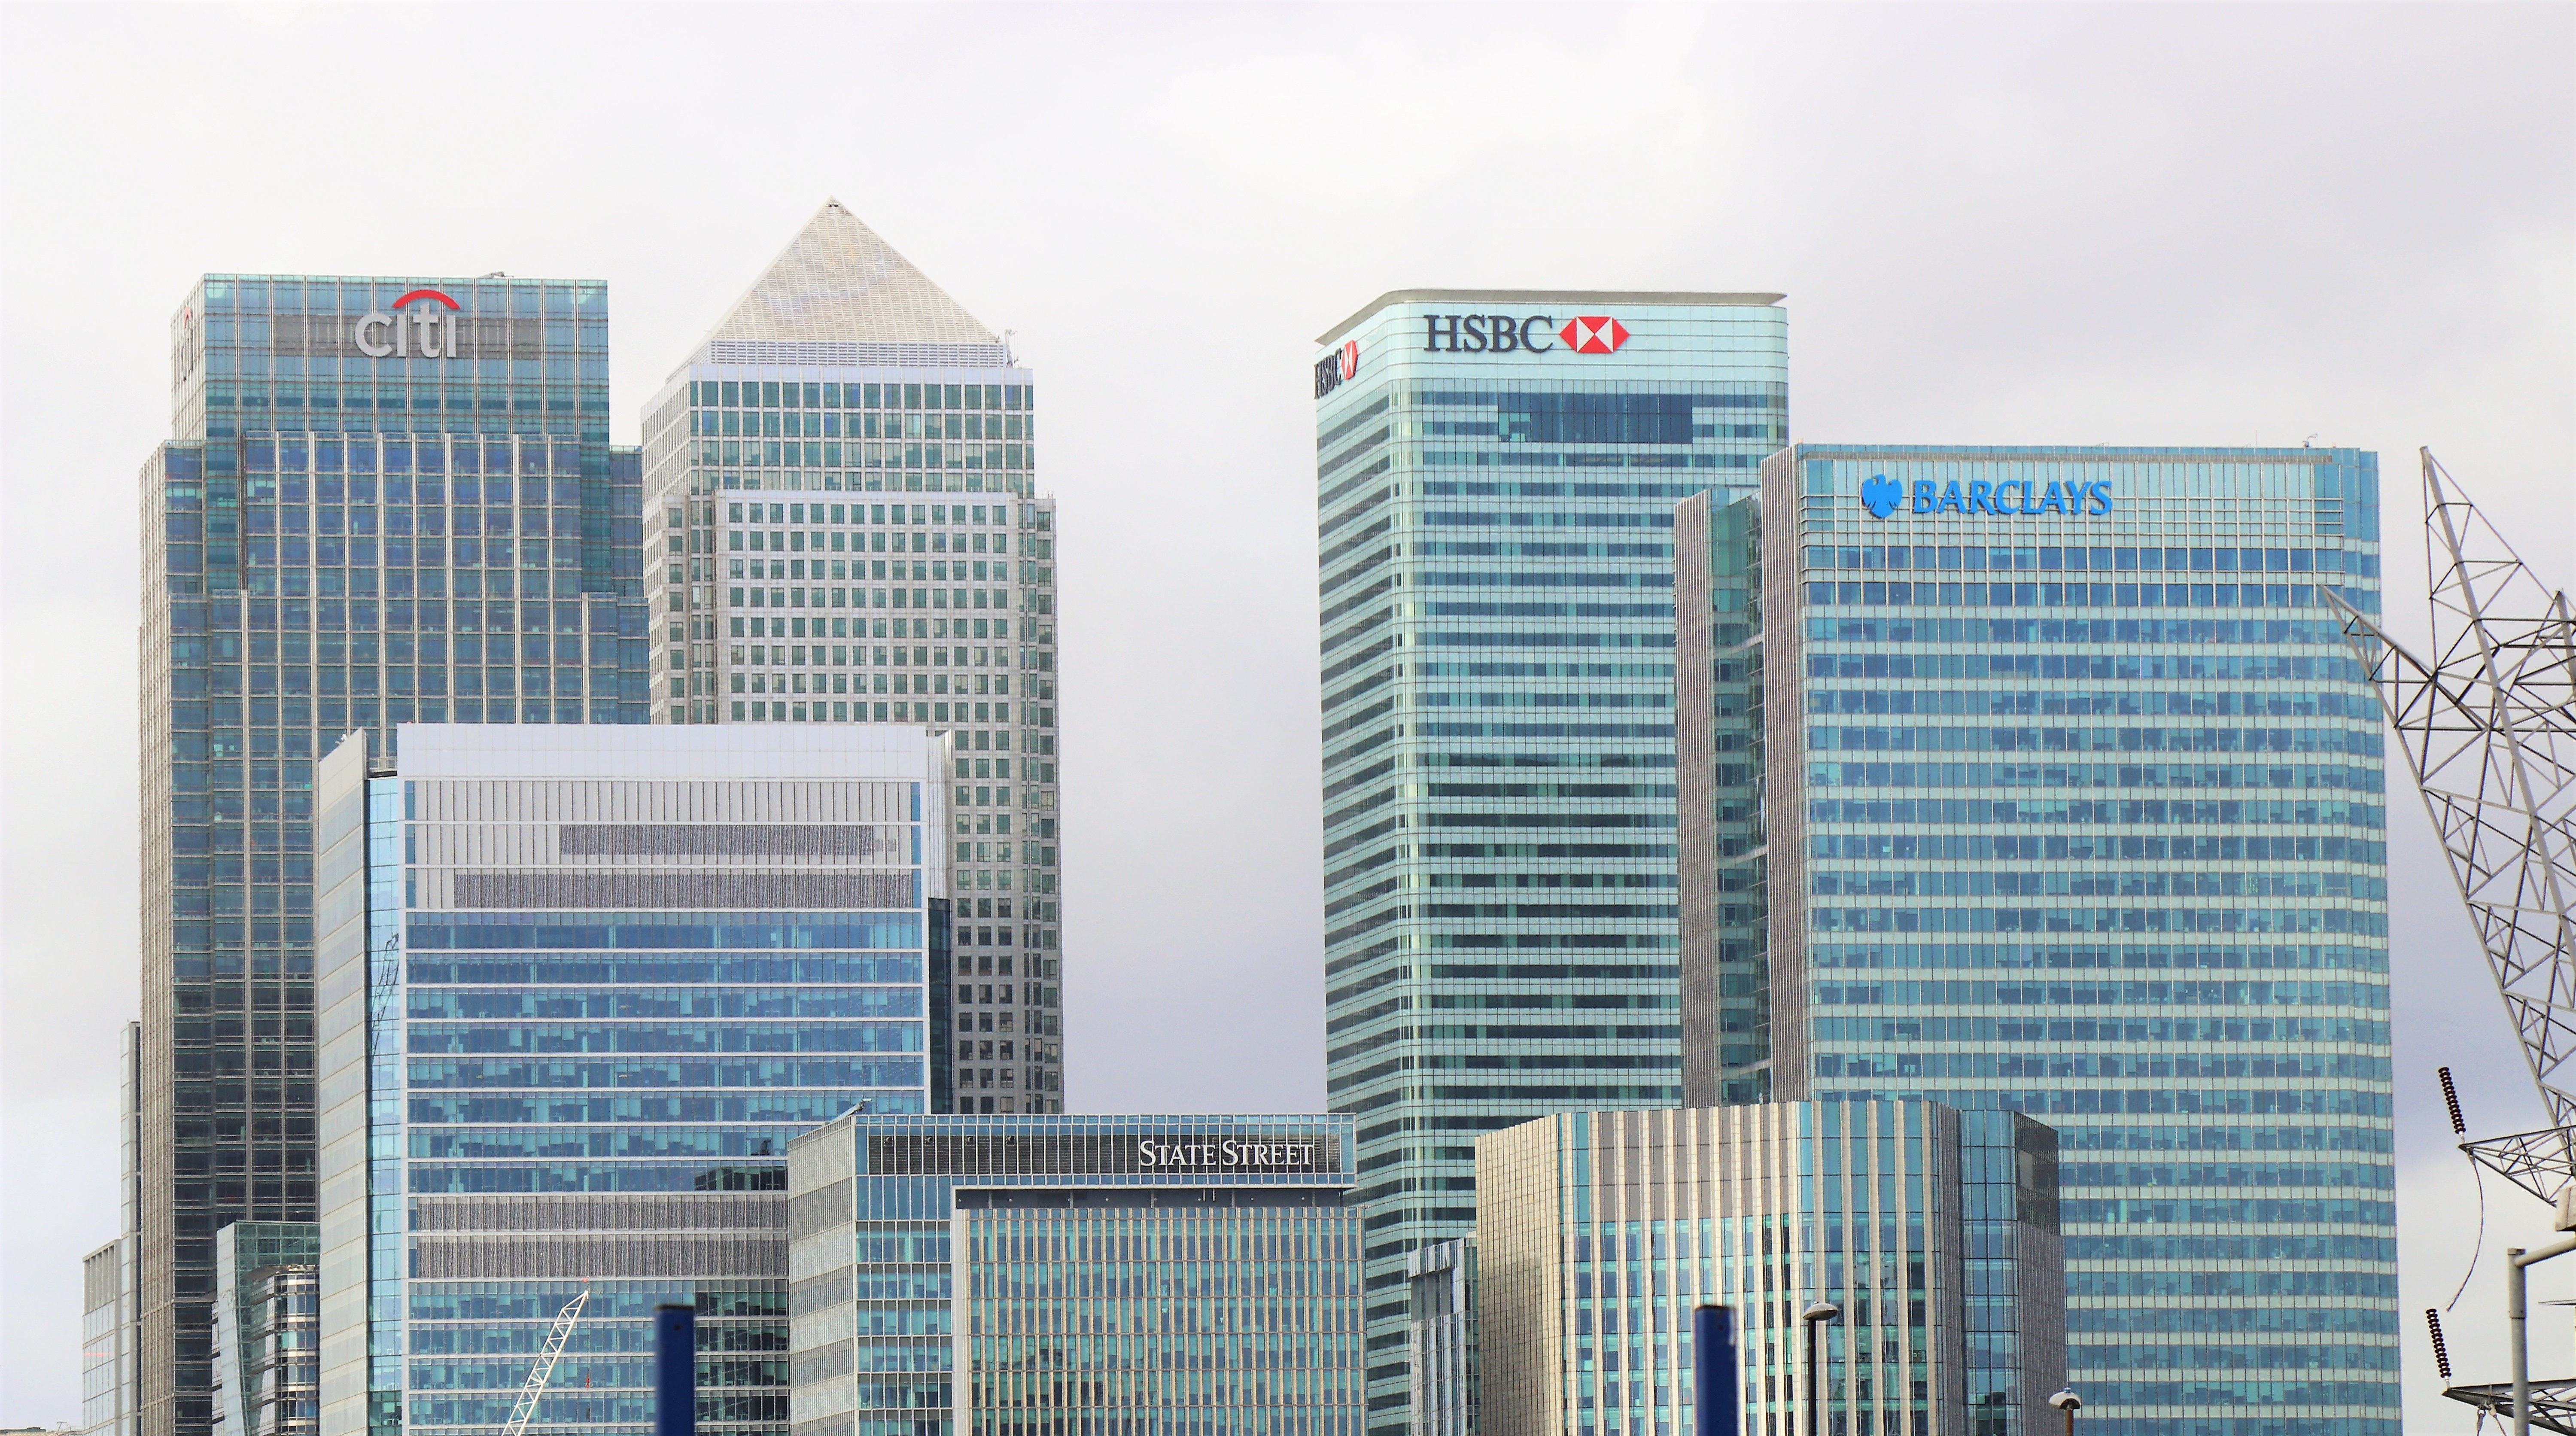 HSBC Q1 earnings missed: The stock unchanged after the bank pause plans to cut 35,000 jobs